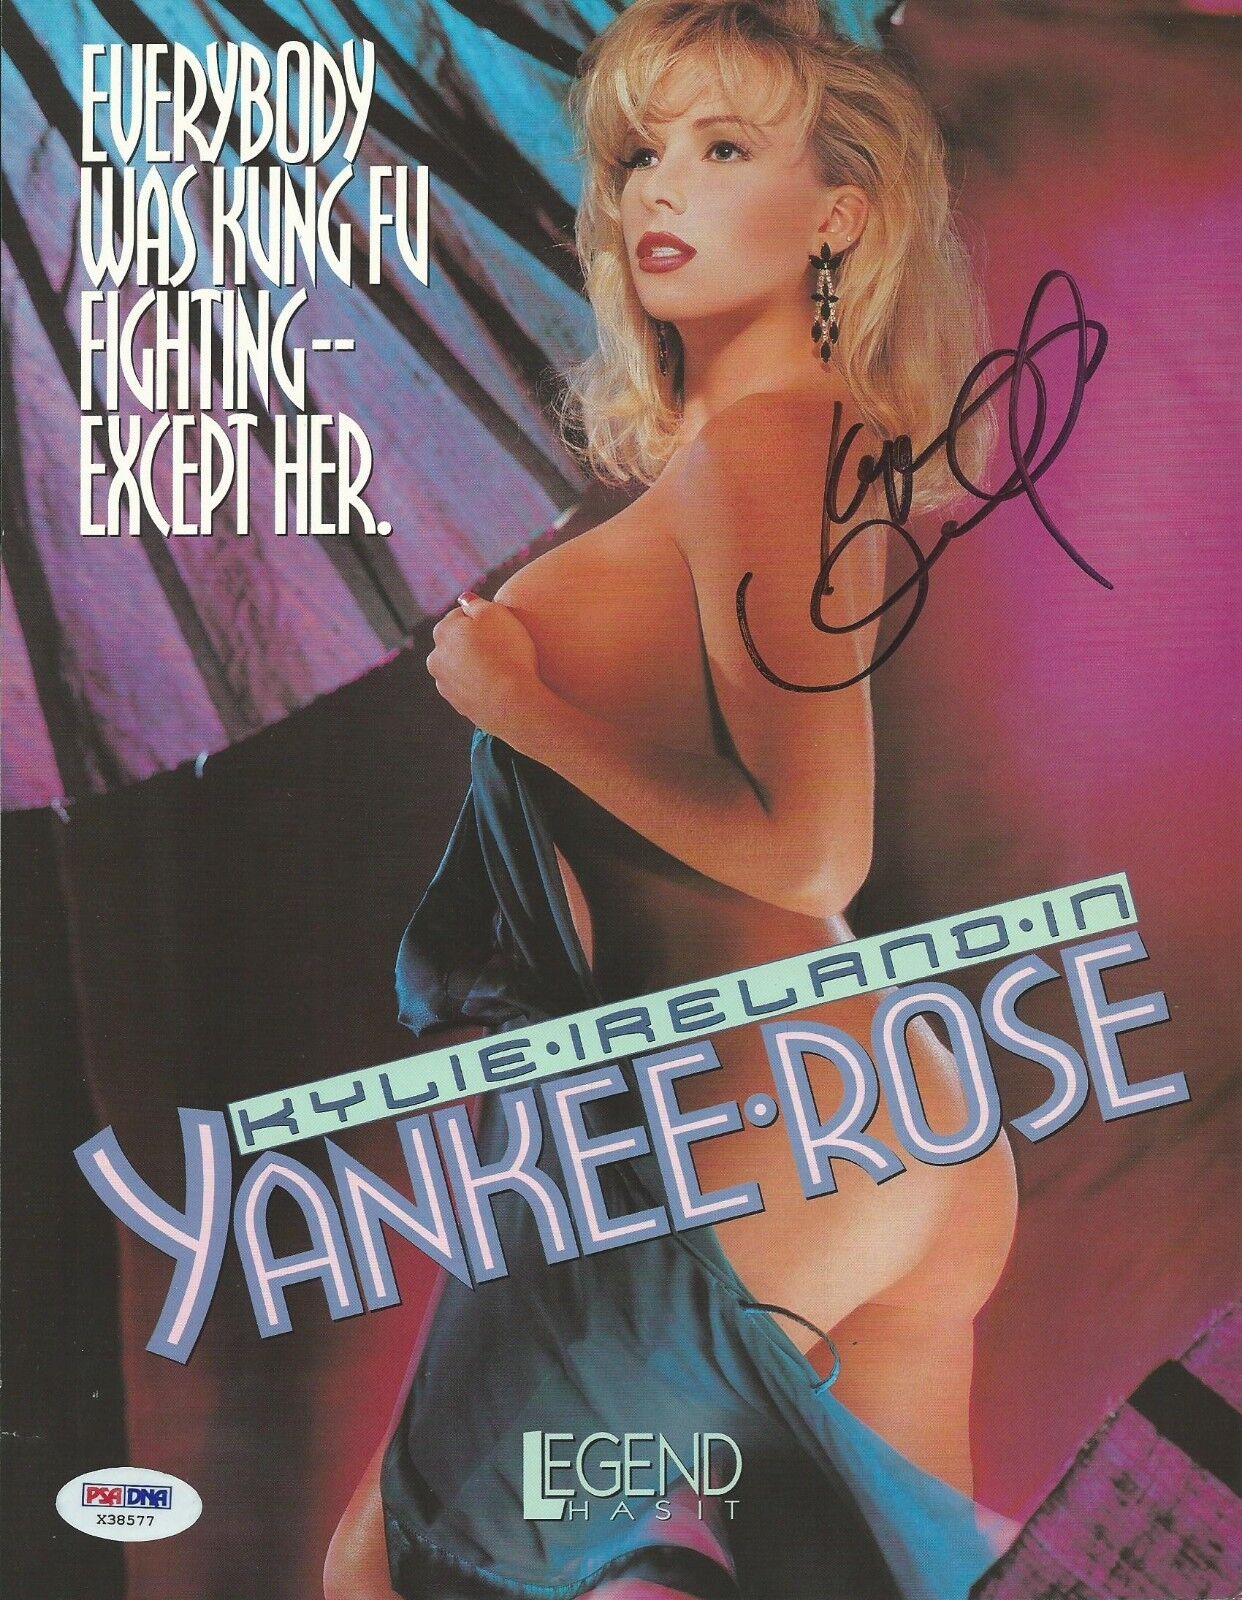 Kylie Ireland Signed 8x10 Photo Poster painting PSA/DNA COA Yankee Rose Promo Poster Autograph